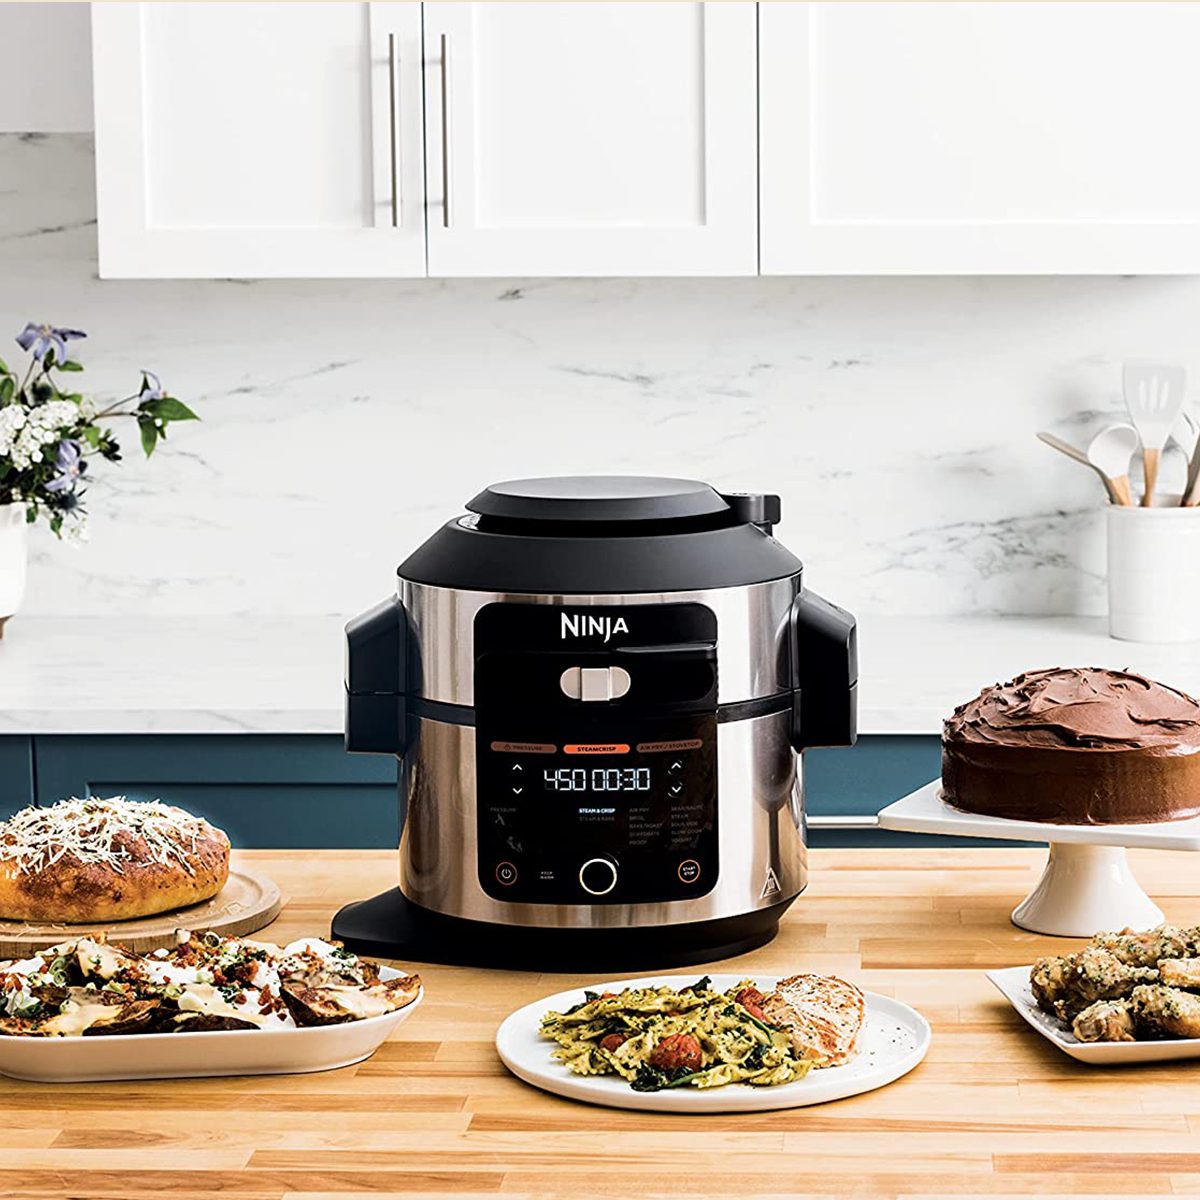 https://www.tasteofhome.com/wp-content/uploads/2022/11/Shop-the-Best-Air-Fryer-Deals-for-Summer-and-Say-Goodbye-to-a-Toasty-Kitchen_FT_via-amazon.com_-1.jpg